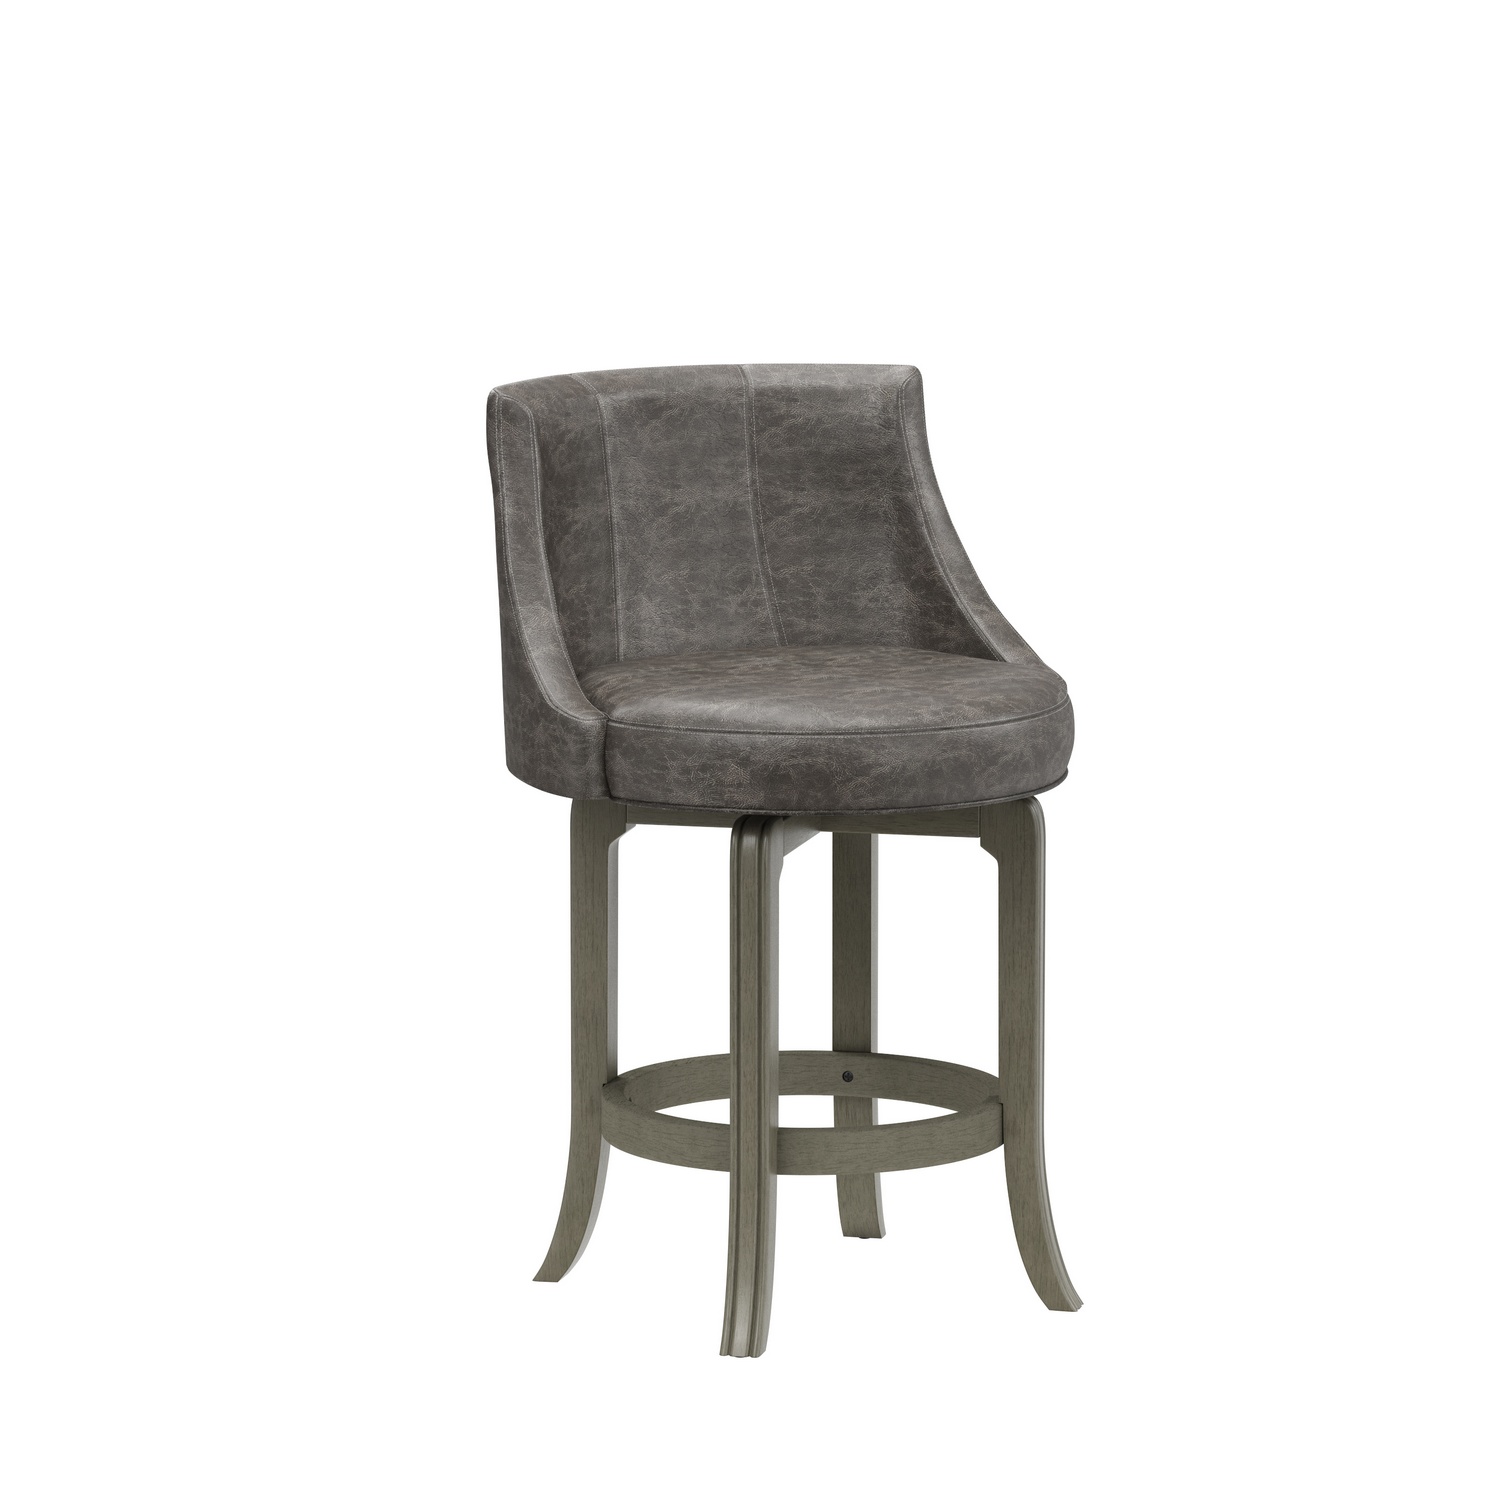 Hillsdale Napa Valley Wood Counter Height Swivel Stool - Aged Gray/Charcoal Faux Leather